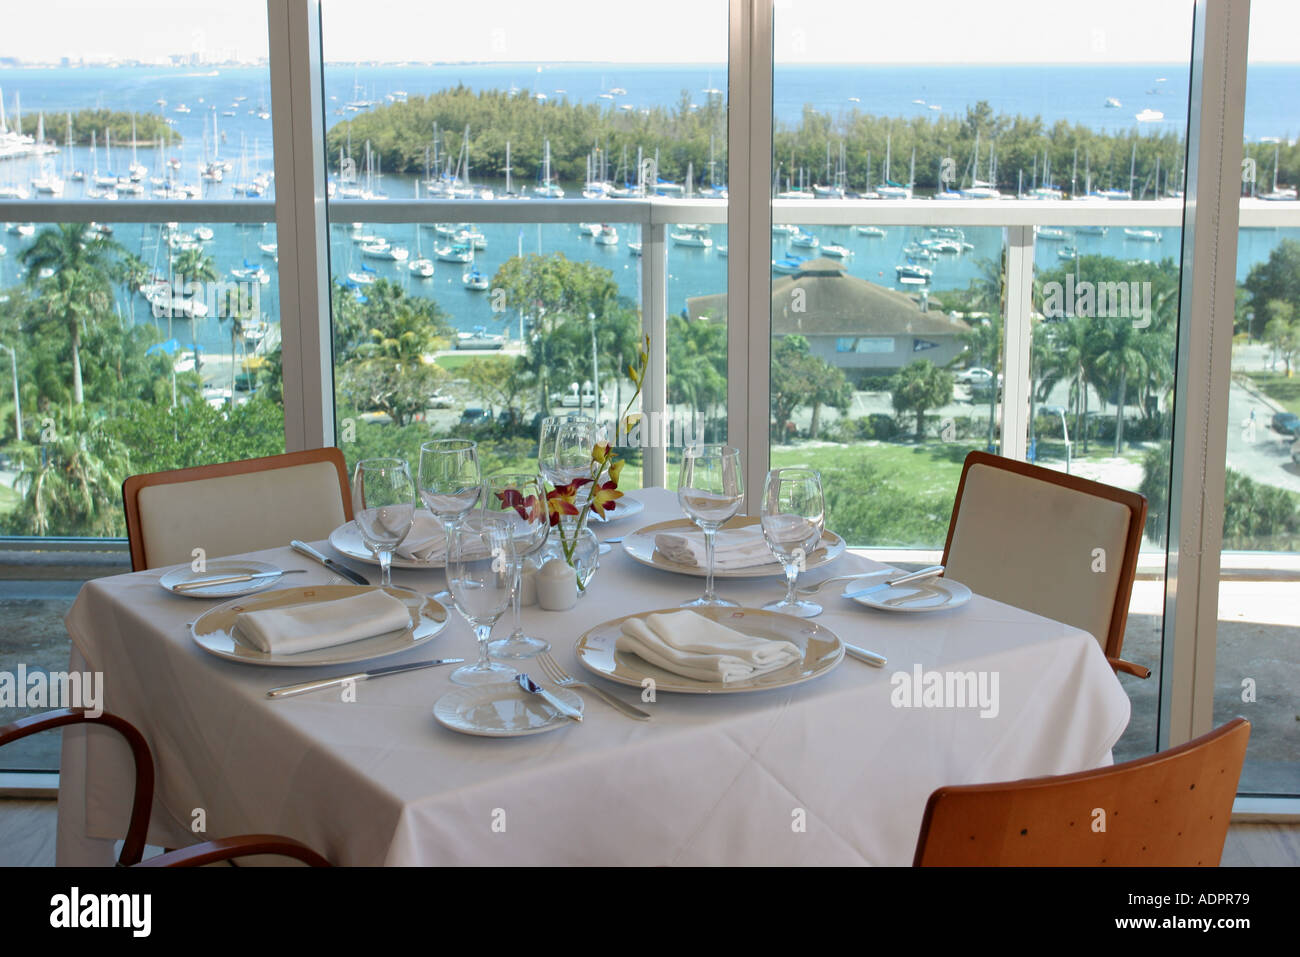 Florida Miami Coconut Grove Sonesta hotel Panorama restaurant Biscayne Bay water view dining table Stock Photo